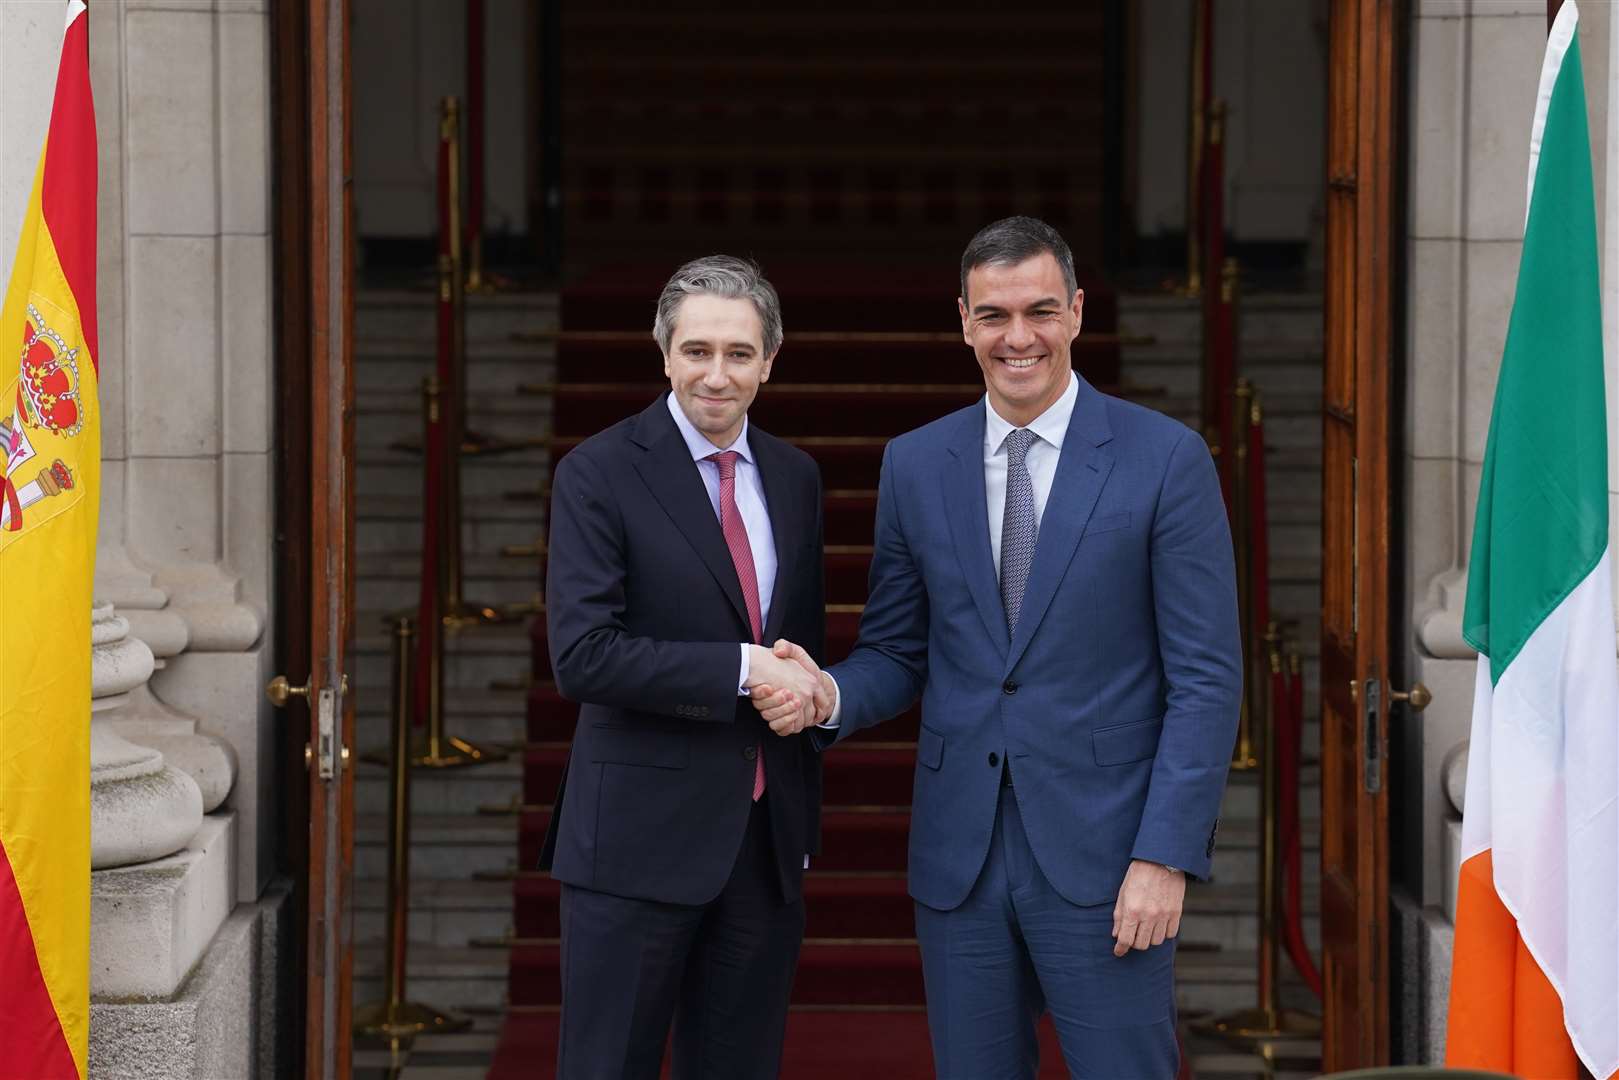 Irish premier Simon Harris worked with Spanish prime minister Pedro Sanchez on recognising Palestinian staehood (Brian Lawless/PA)